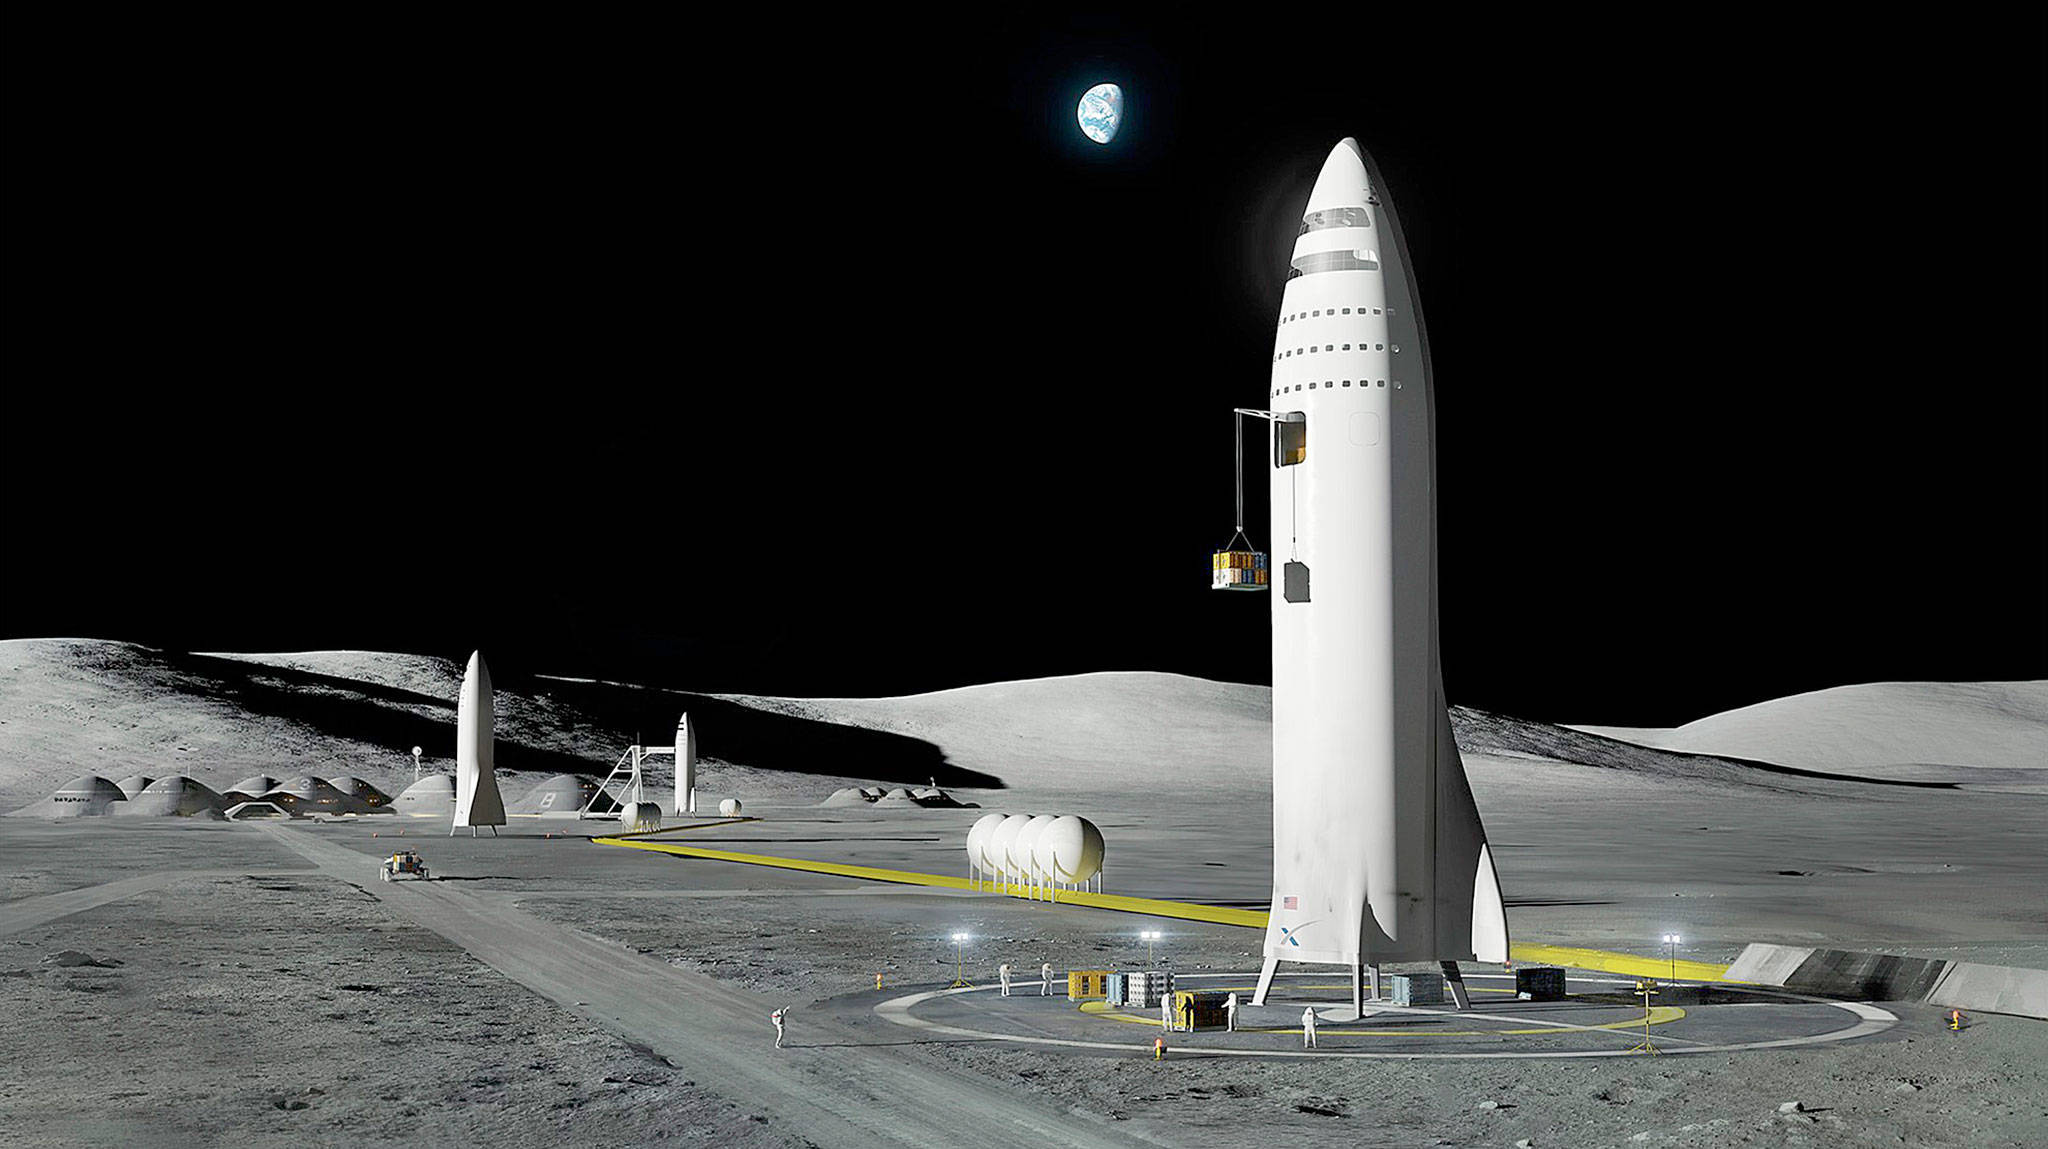 This artist’s rendering shows SpaceX’s new mega-rocket design on Earth’s moon. (SpaceX)